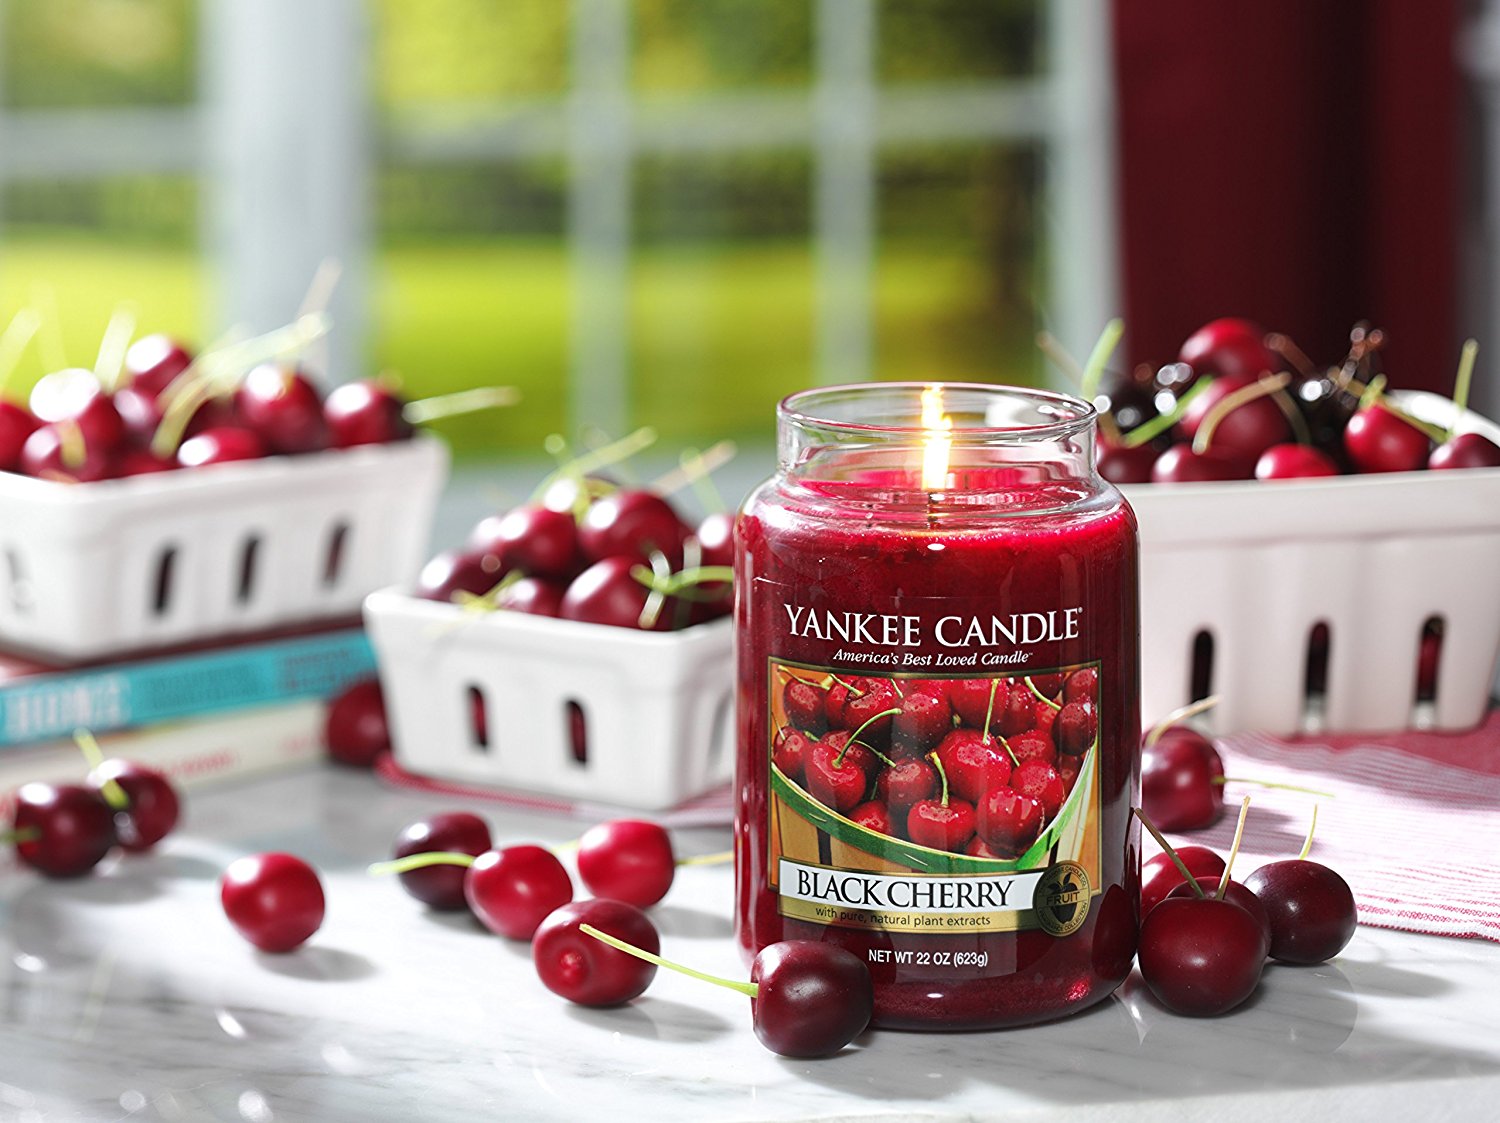 Yankee Candle Black Cherry Large Jar Candle Only $15.31!